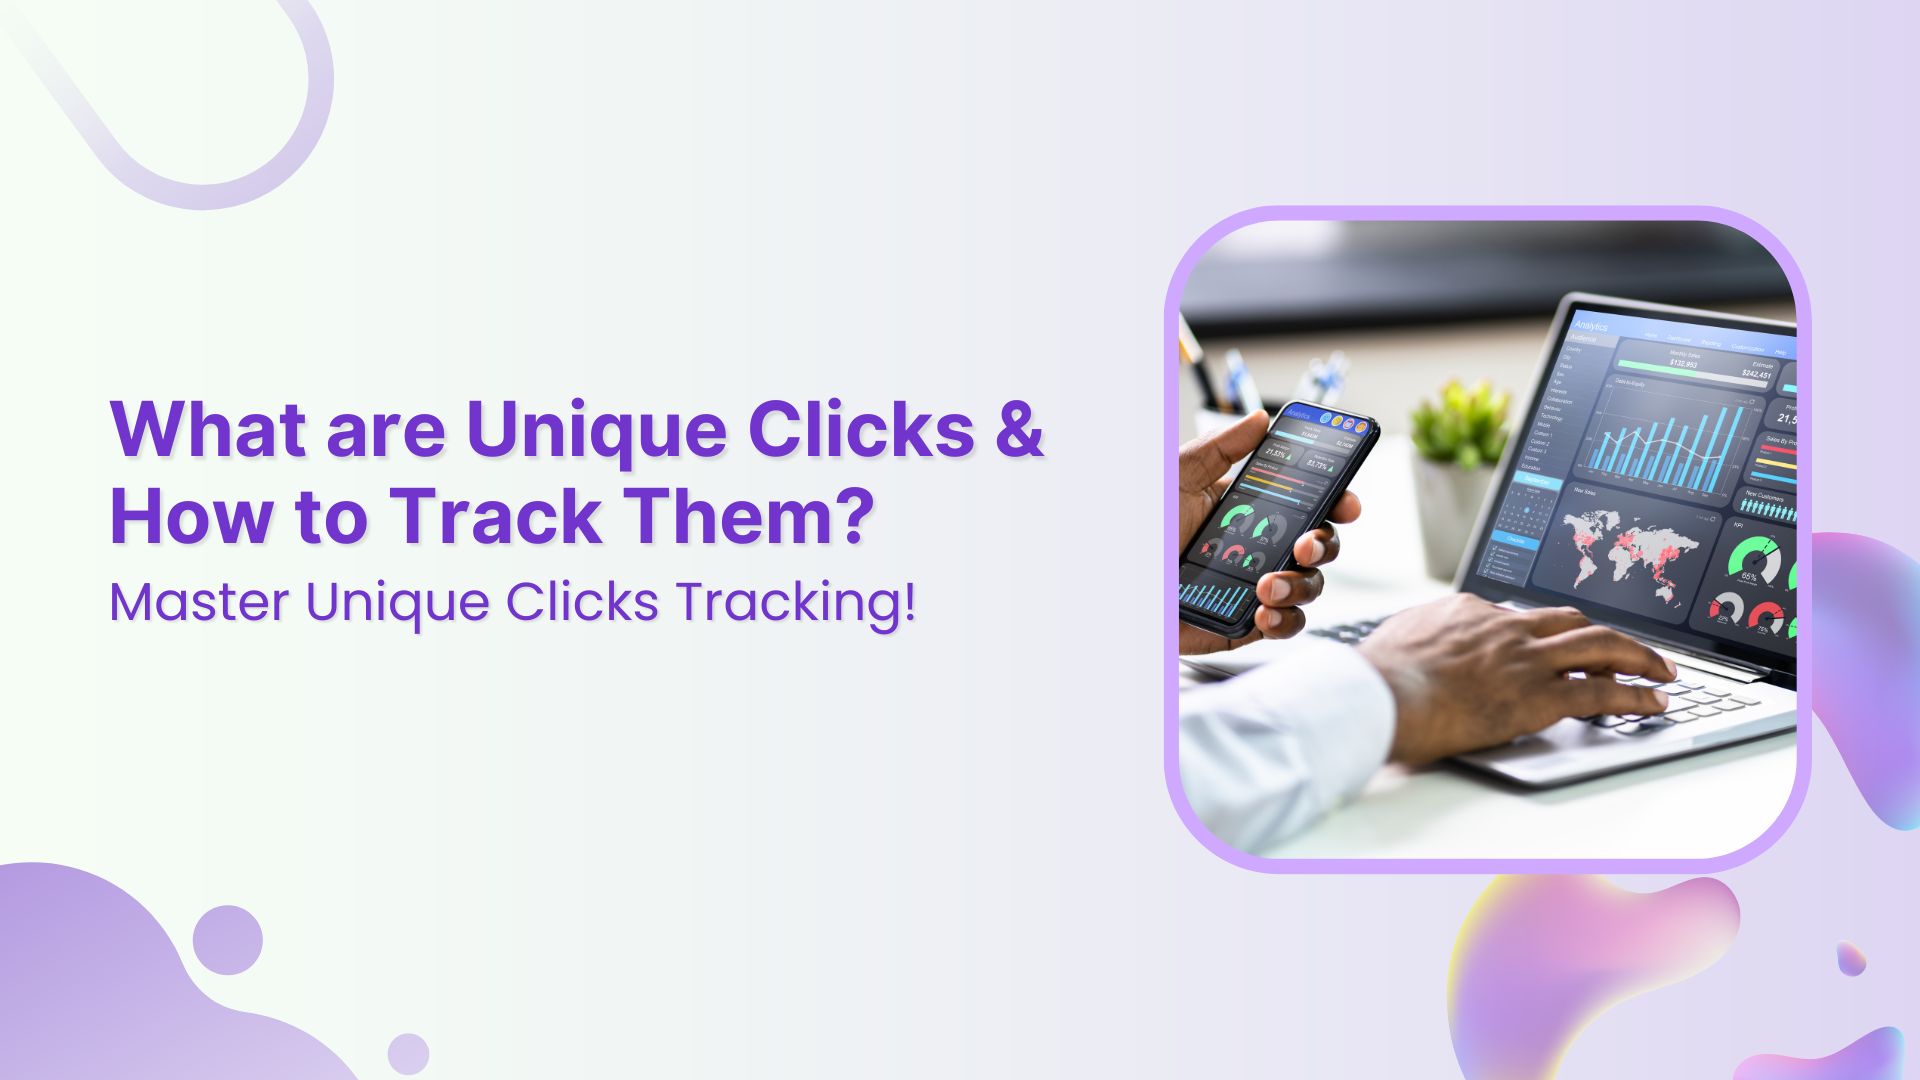 What are Unique Clicks and How to Track Them?